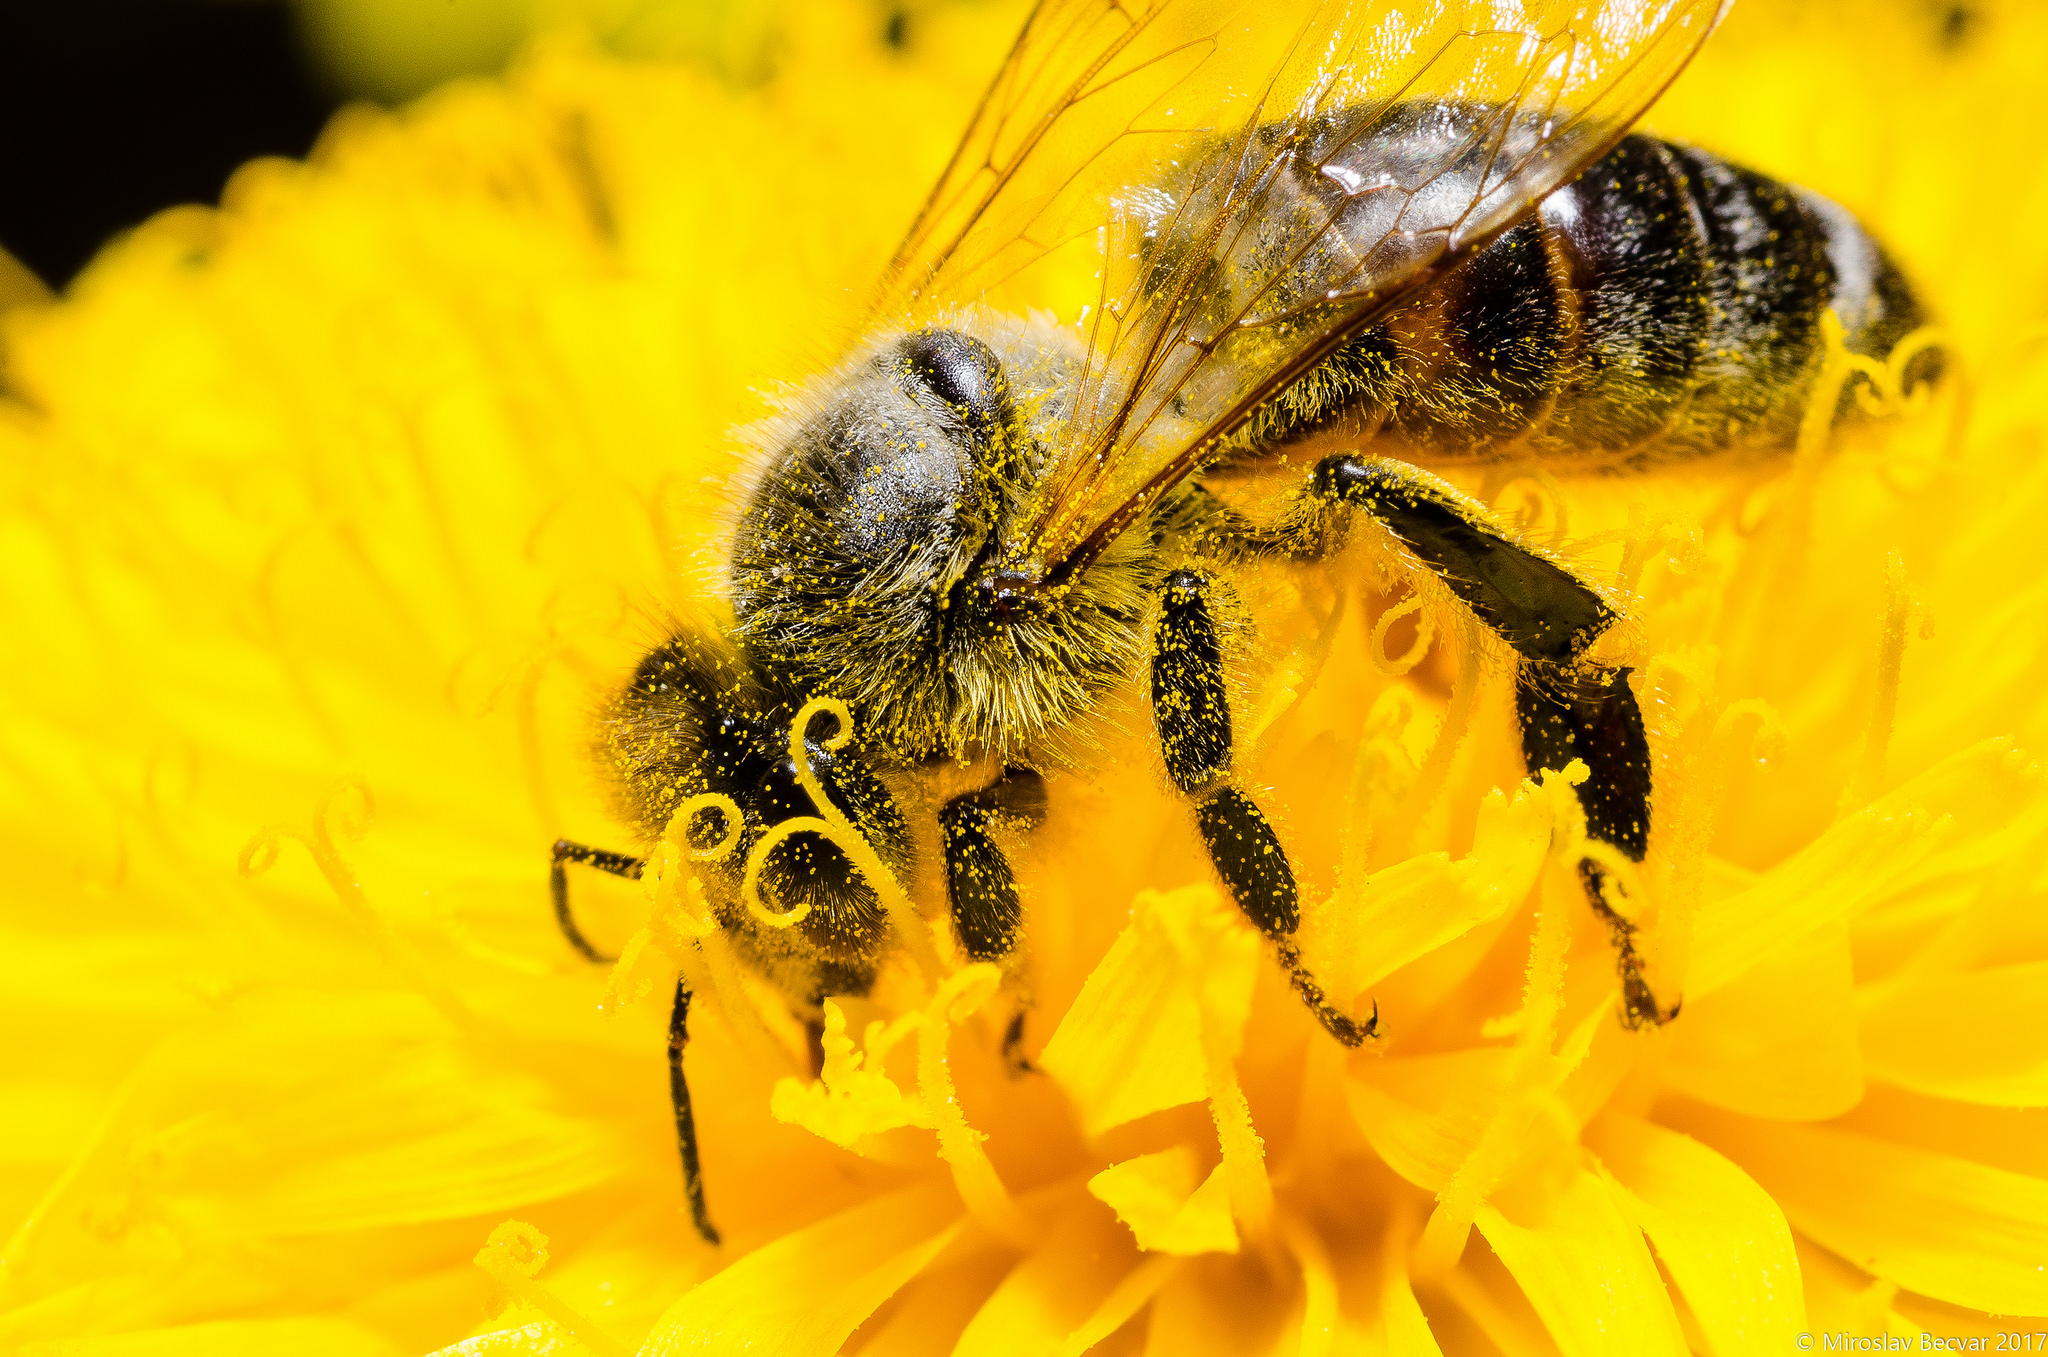 Bacteria Engineered to Protect Bees from Pests and Pathogens - UT News